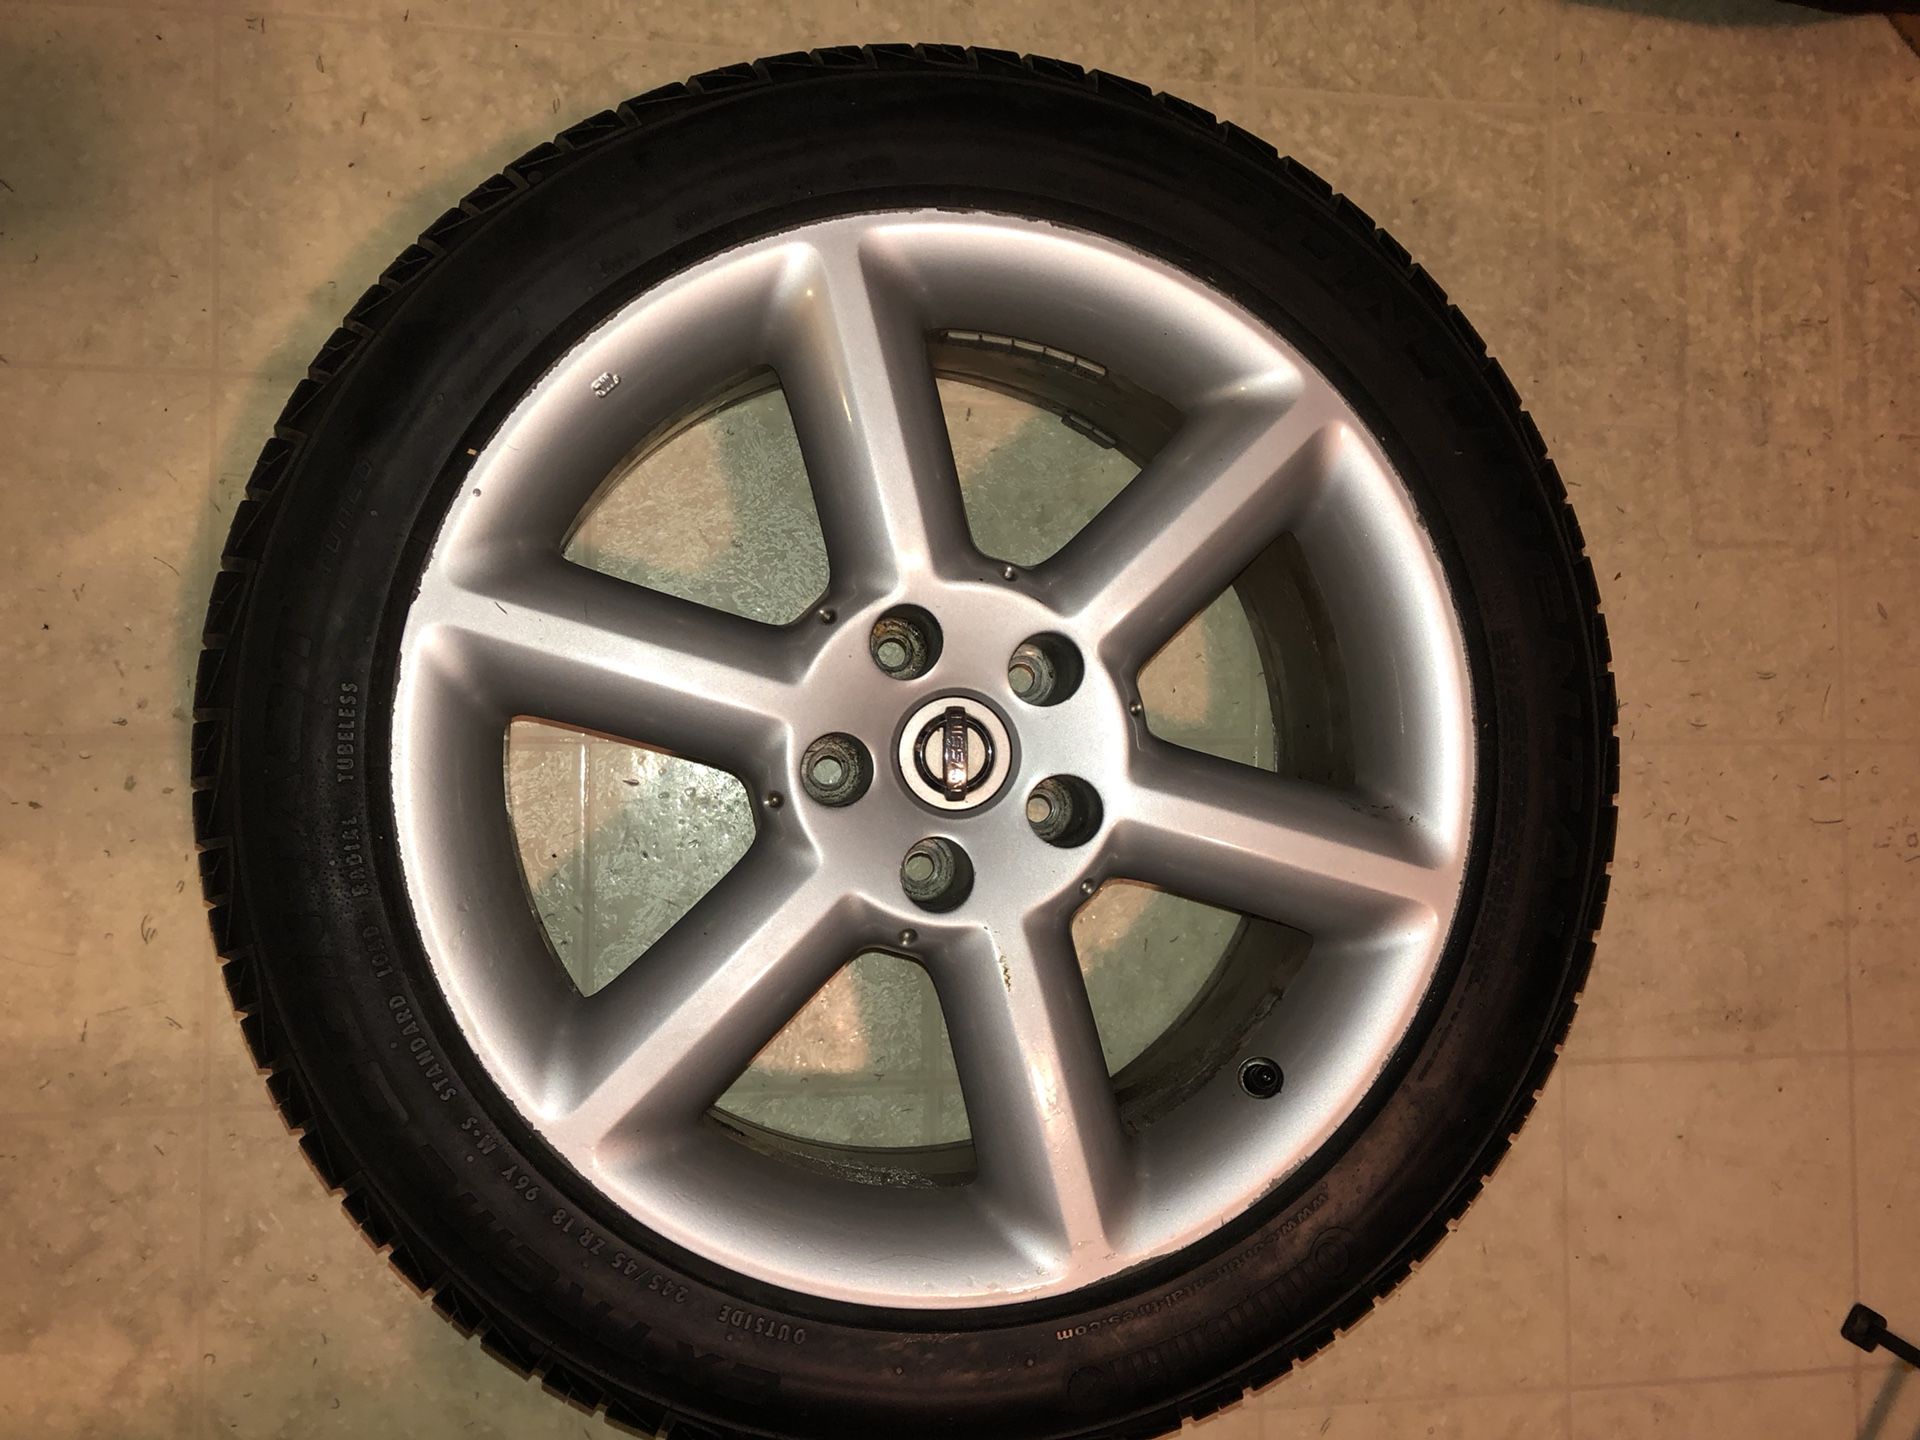 350z Oem Wheels and Tires (4)